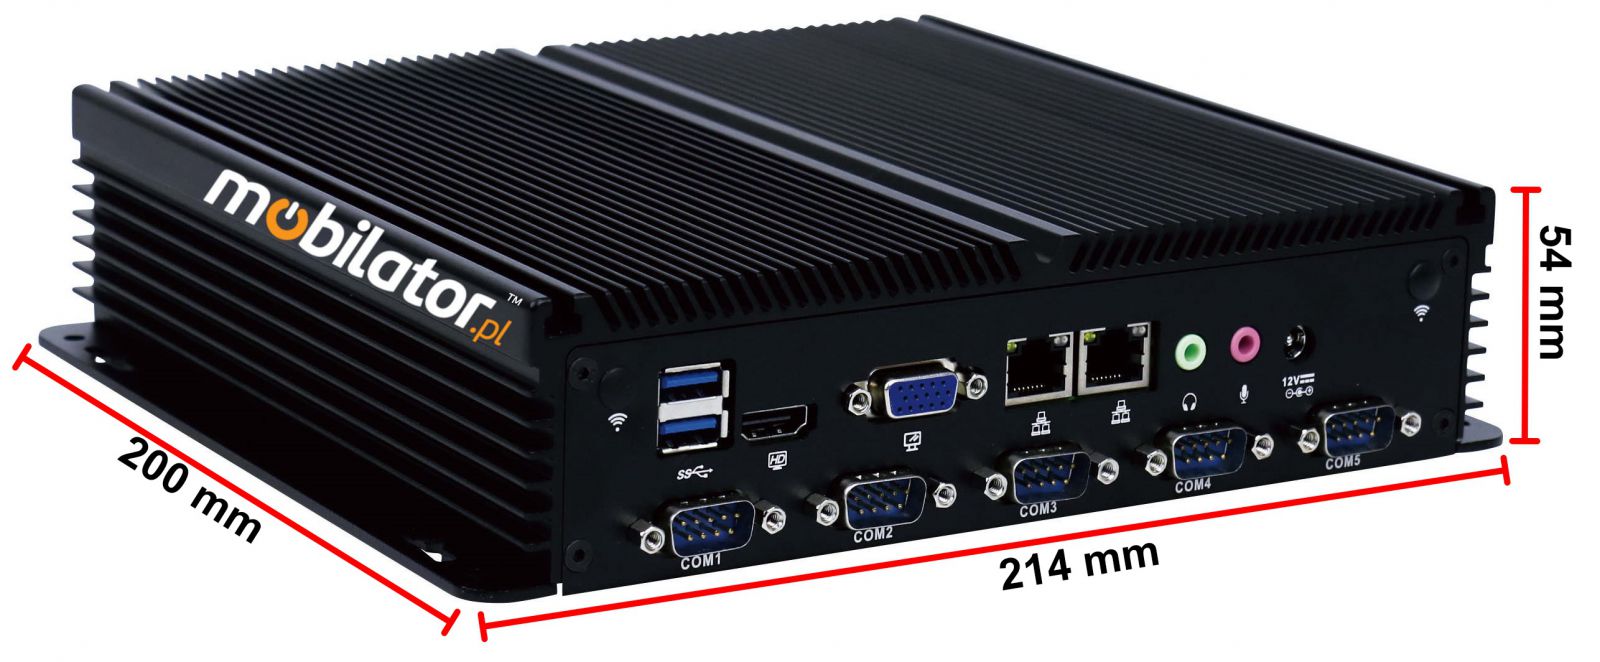 IBOX-205 Industrial computer for warehouse applications with WiFi 3G 4G 6x COM module